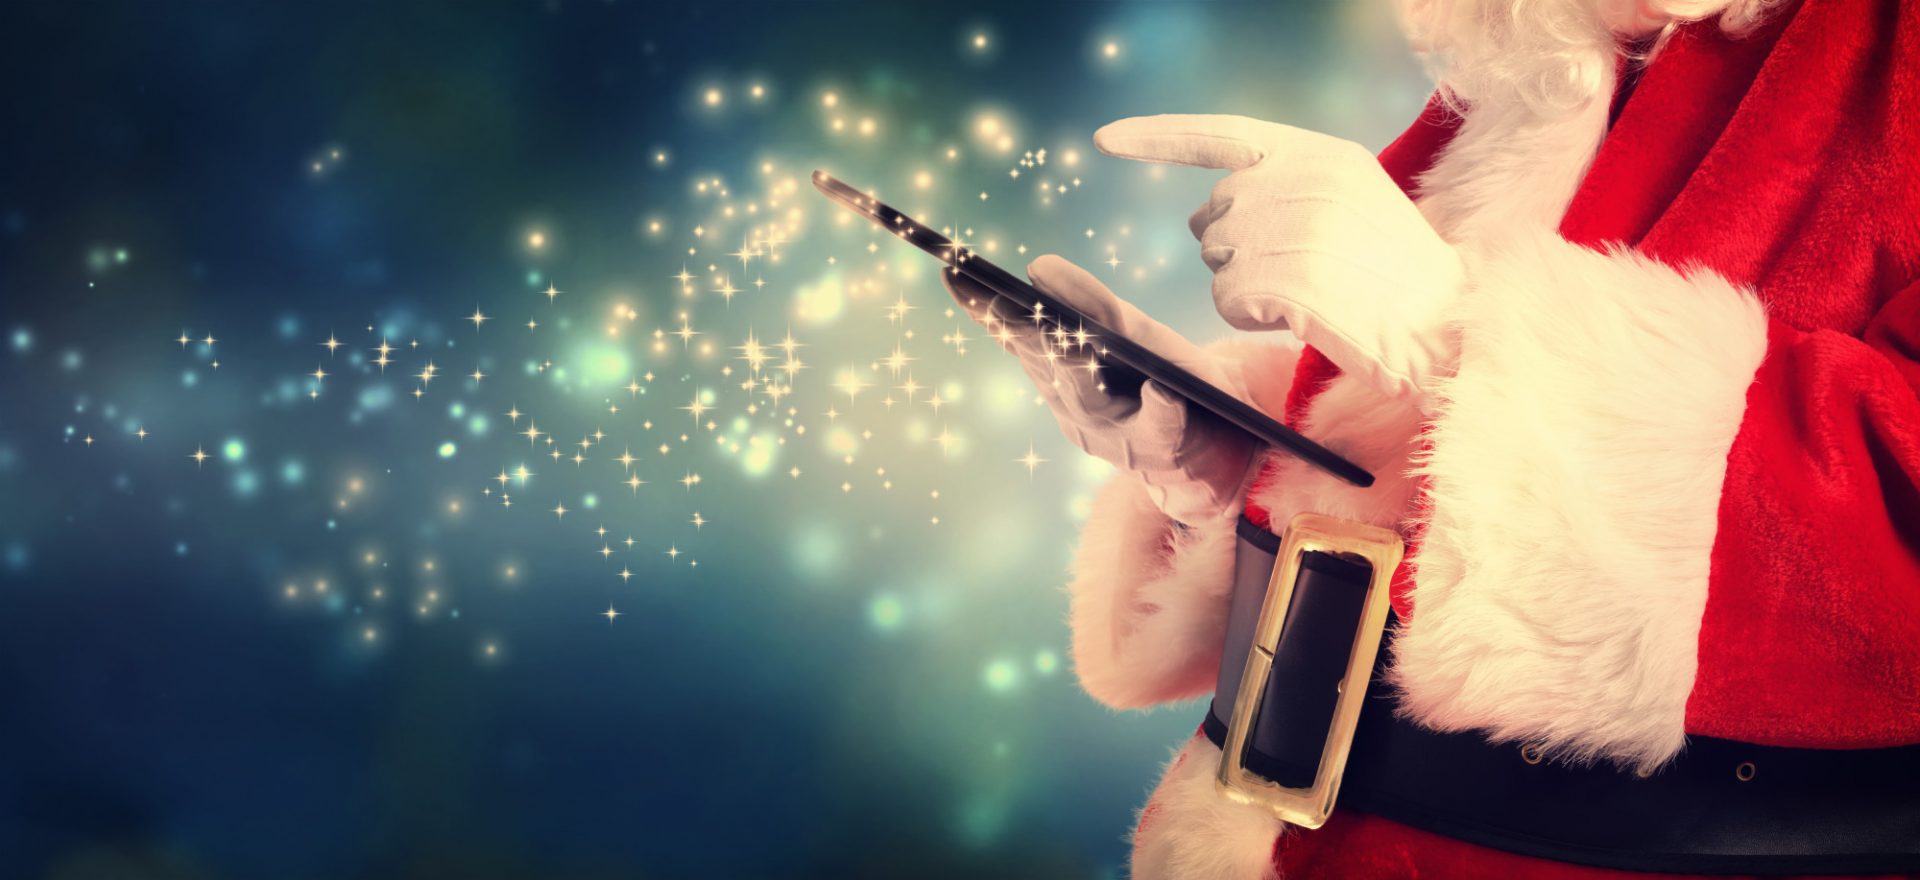 9 Amazing Ideas Will Make Your Holiday Social Media Campaign Pop